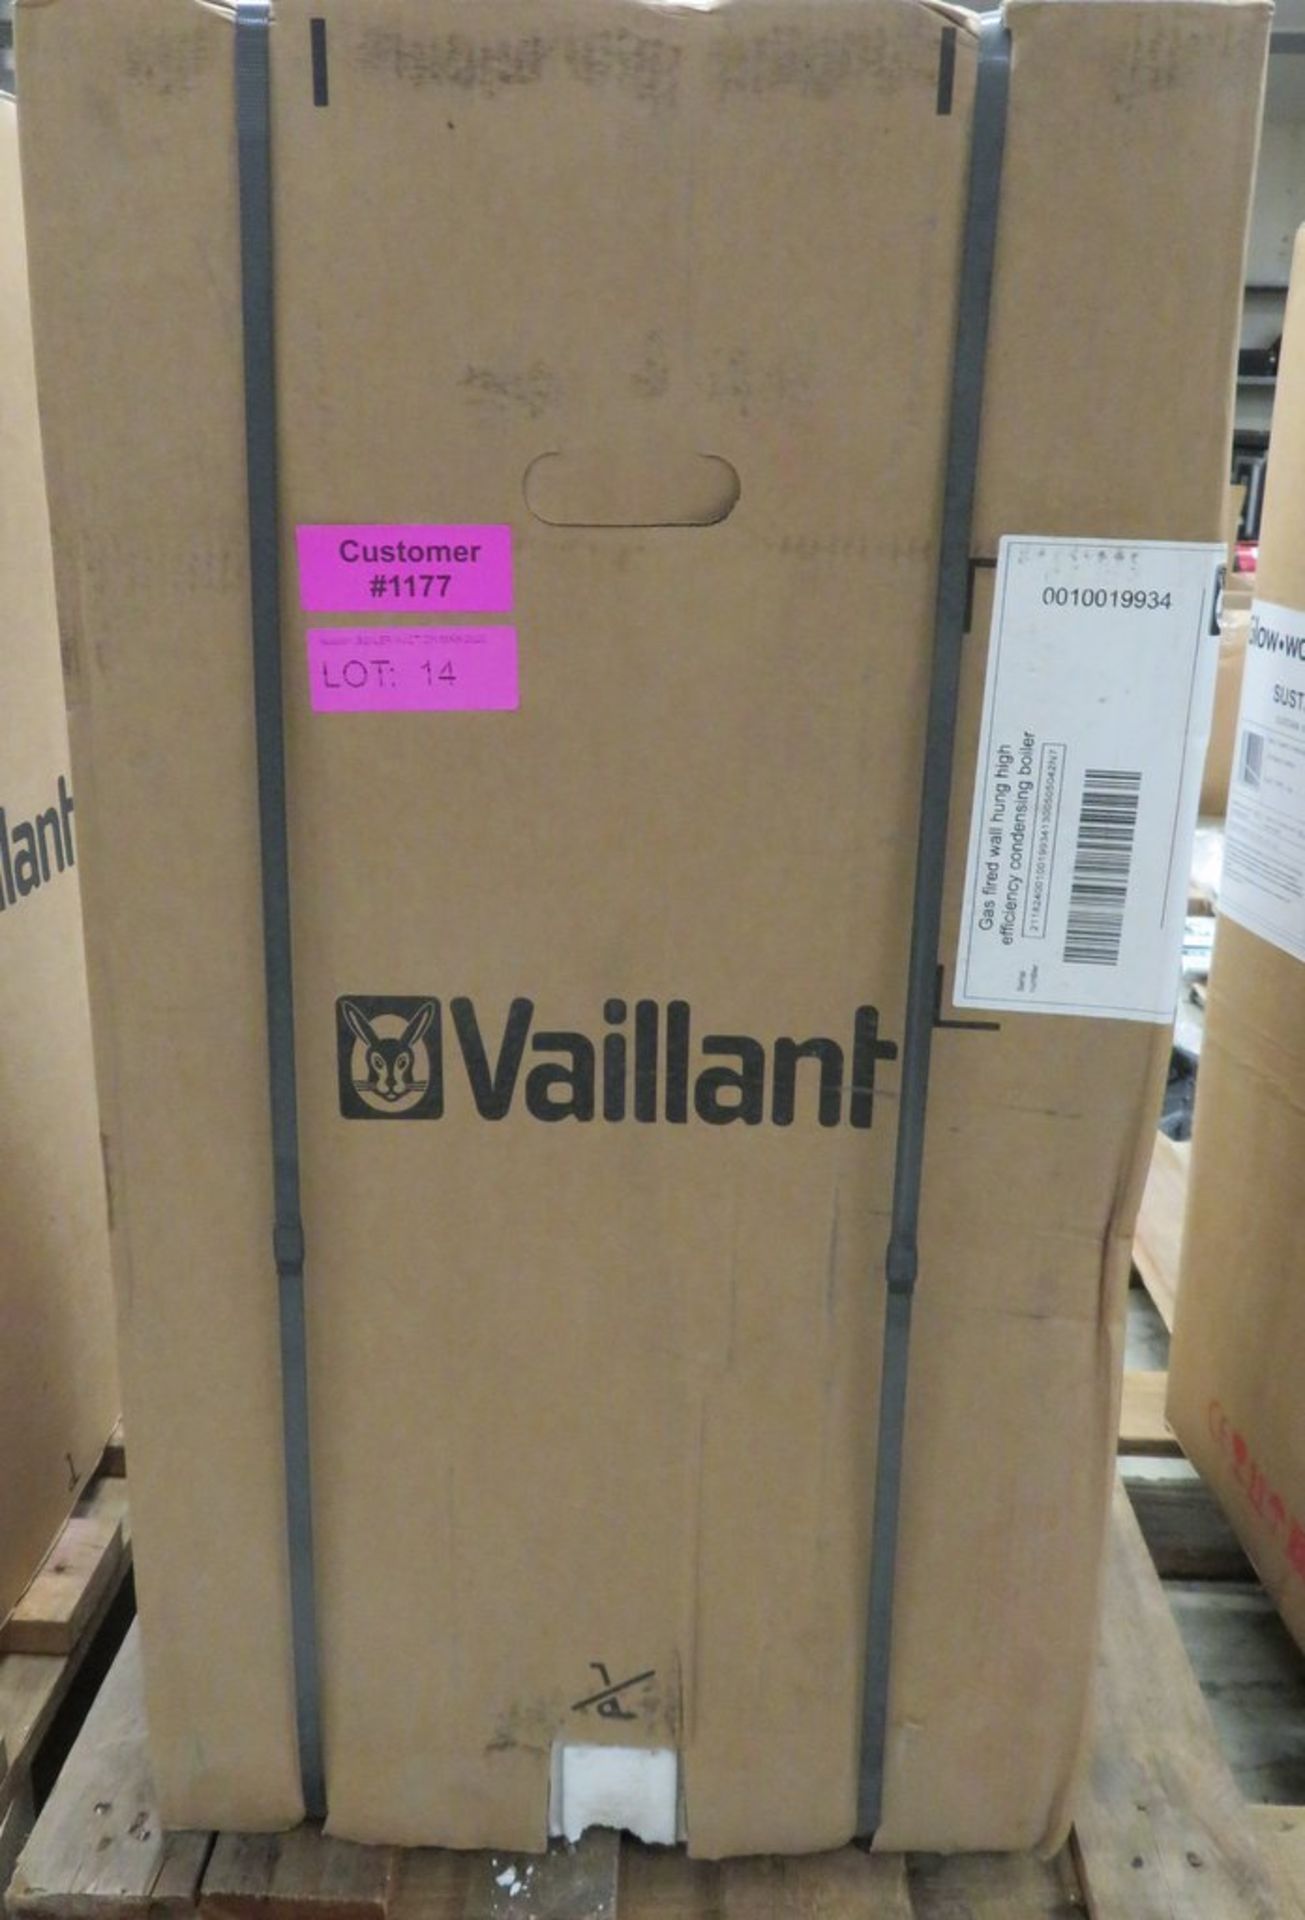 Vaillant Home System 12kw condensing boiler, new in box, rrp £688 - Image 2 of 3